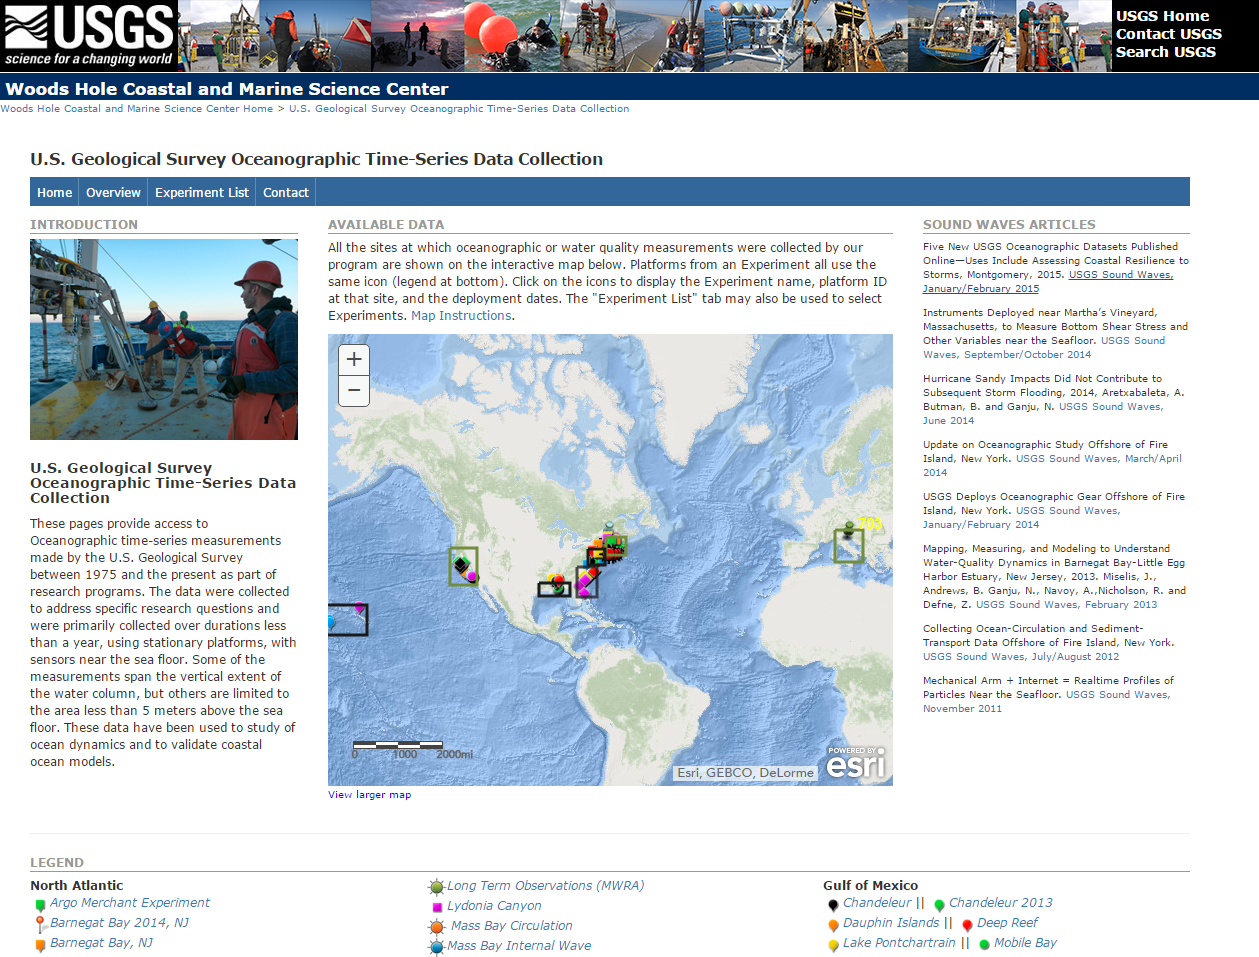 The main page of the oceanographic time-series data collection Web site.